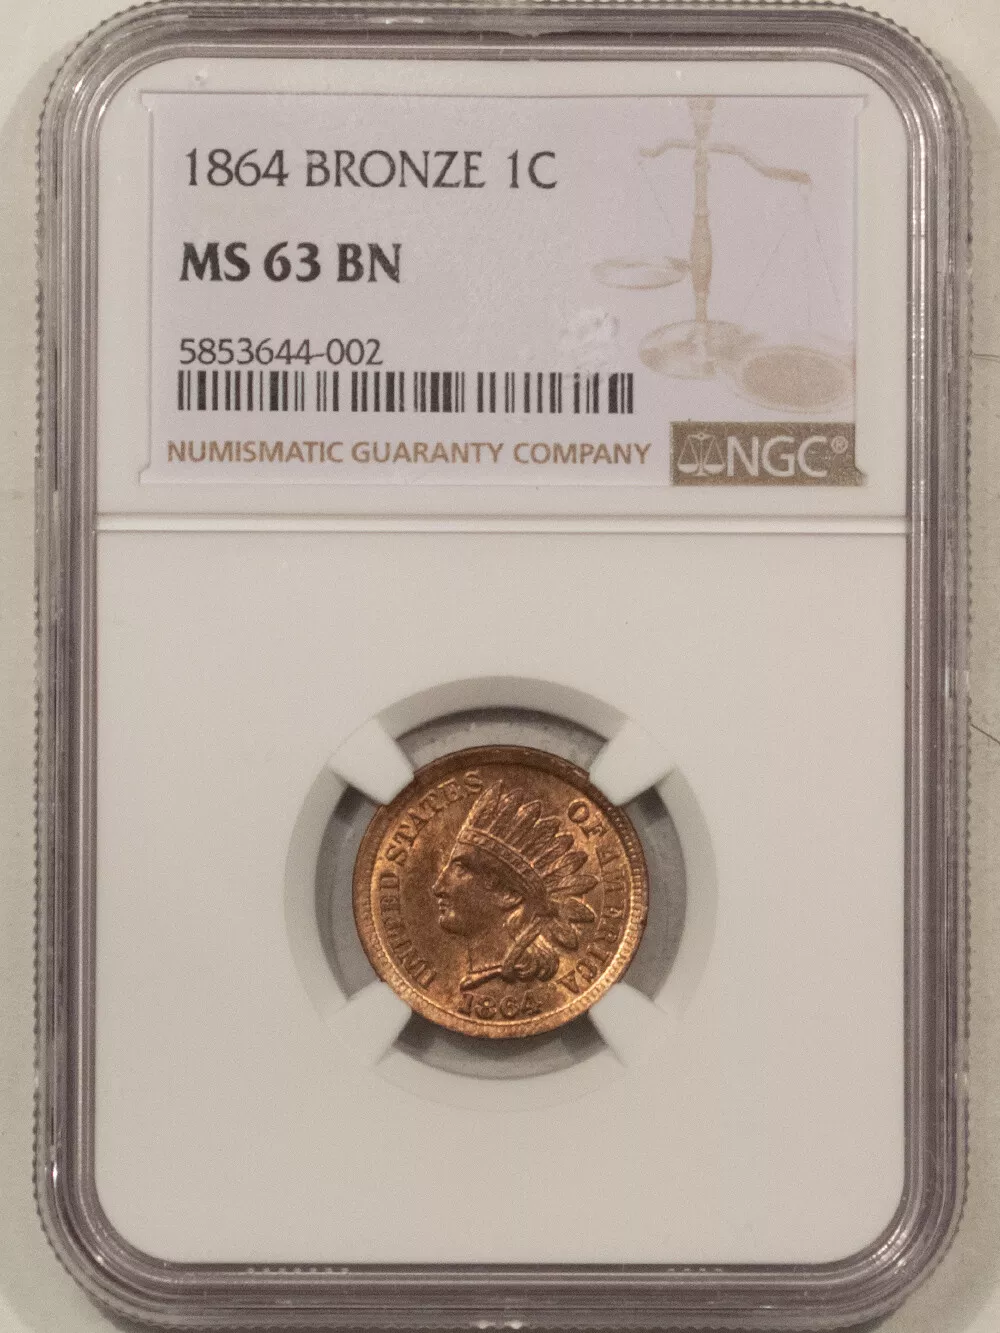 1864 BRONZE INDIAN CENT - NGC MS-63 BN, LOOKS RED-BROWN! PREMIUM QUALITY!